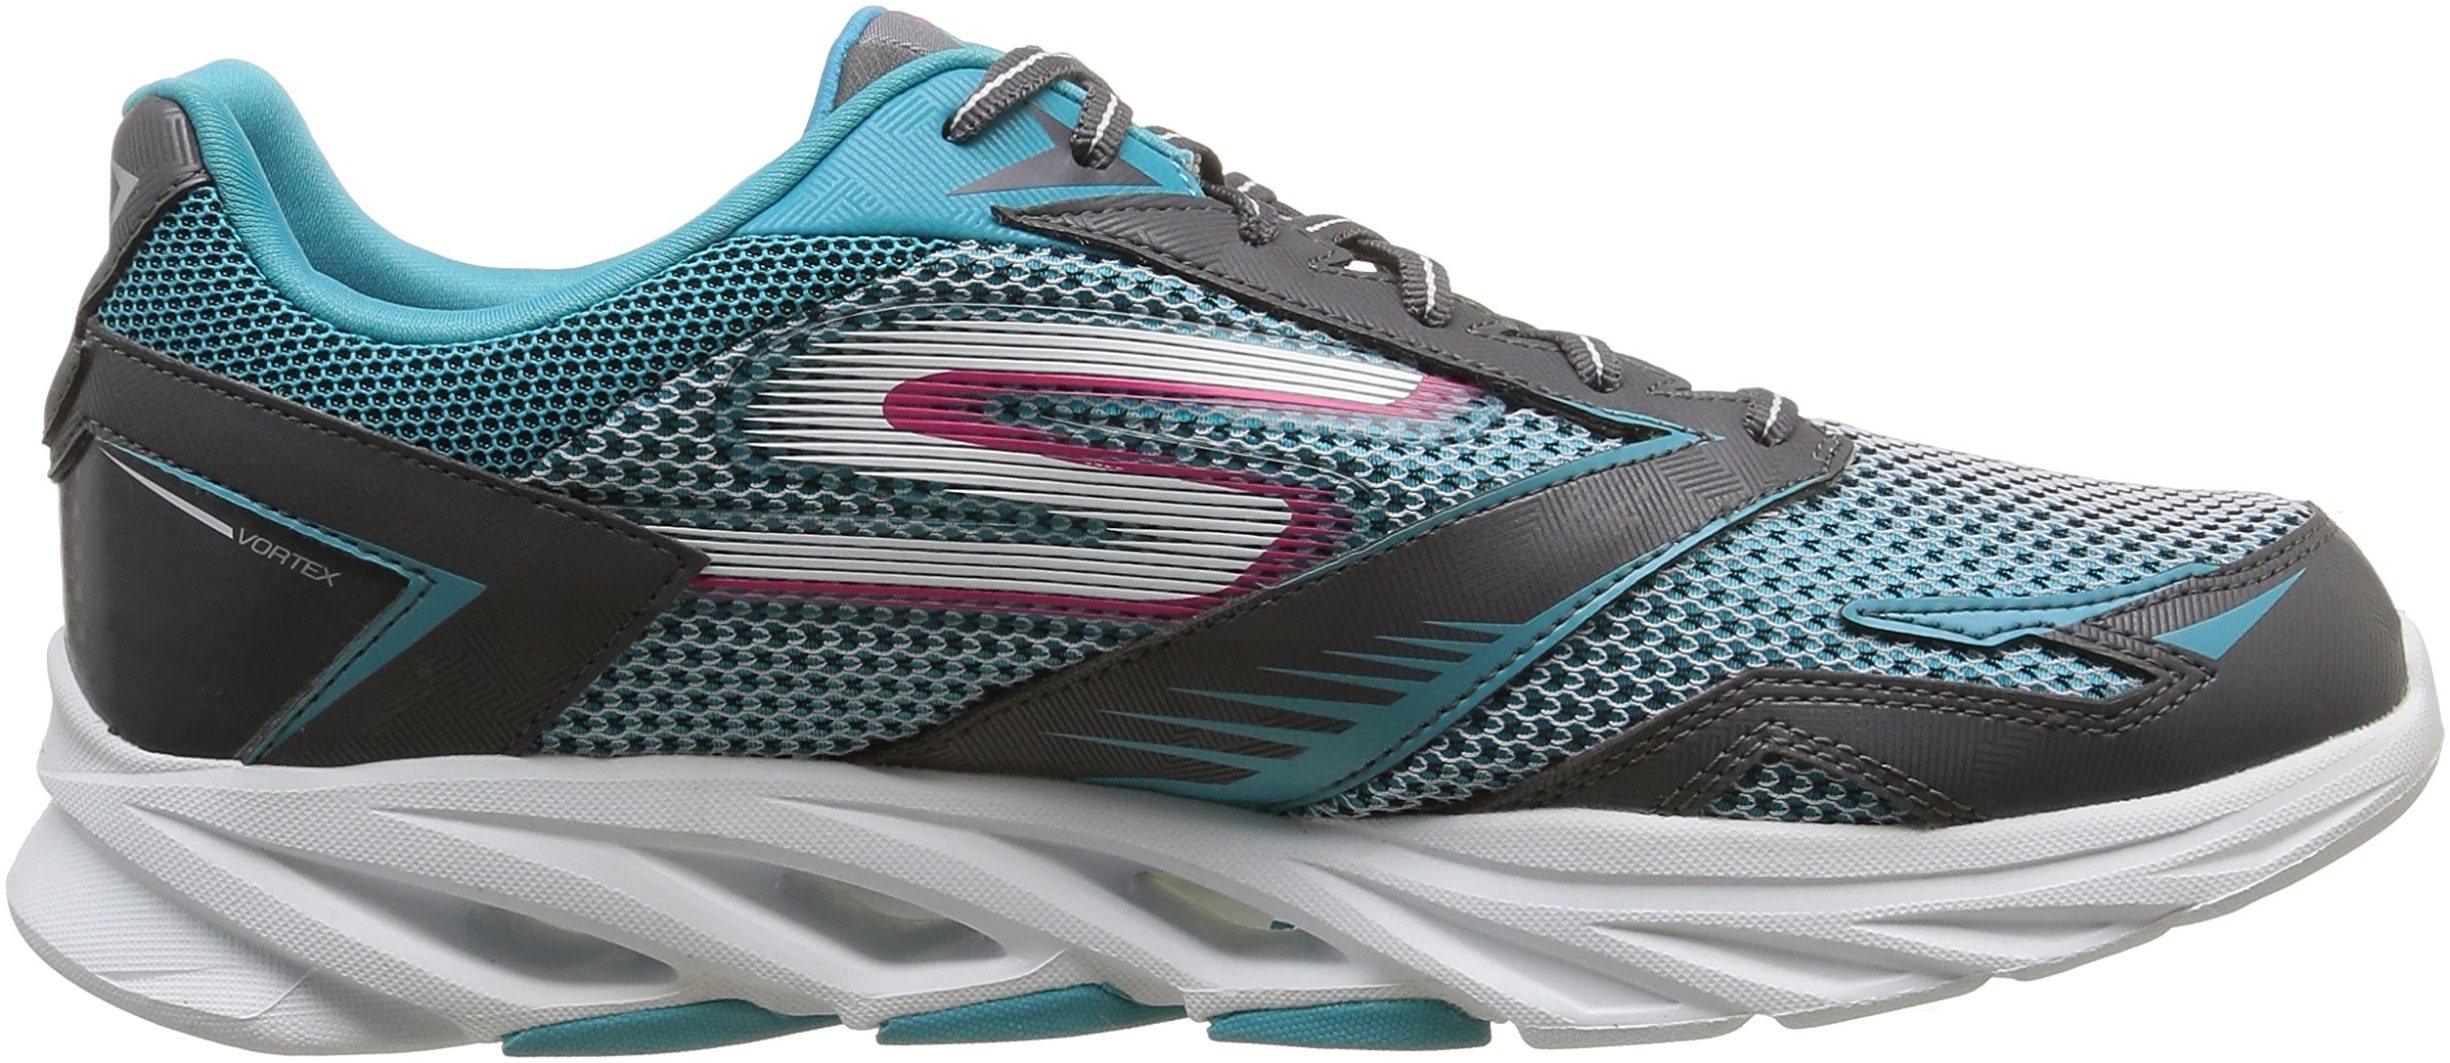 sketcher running shoes review